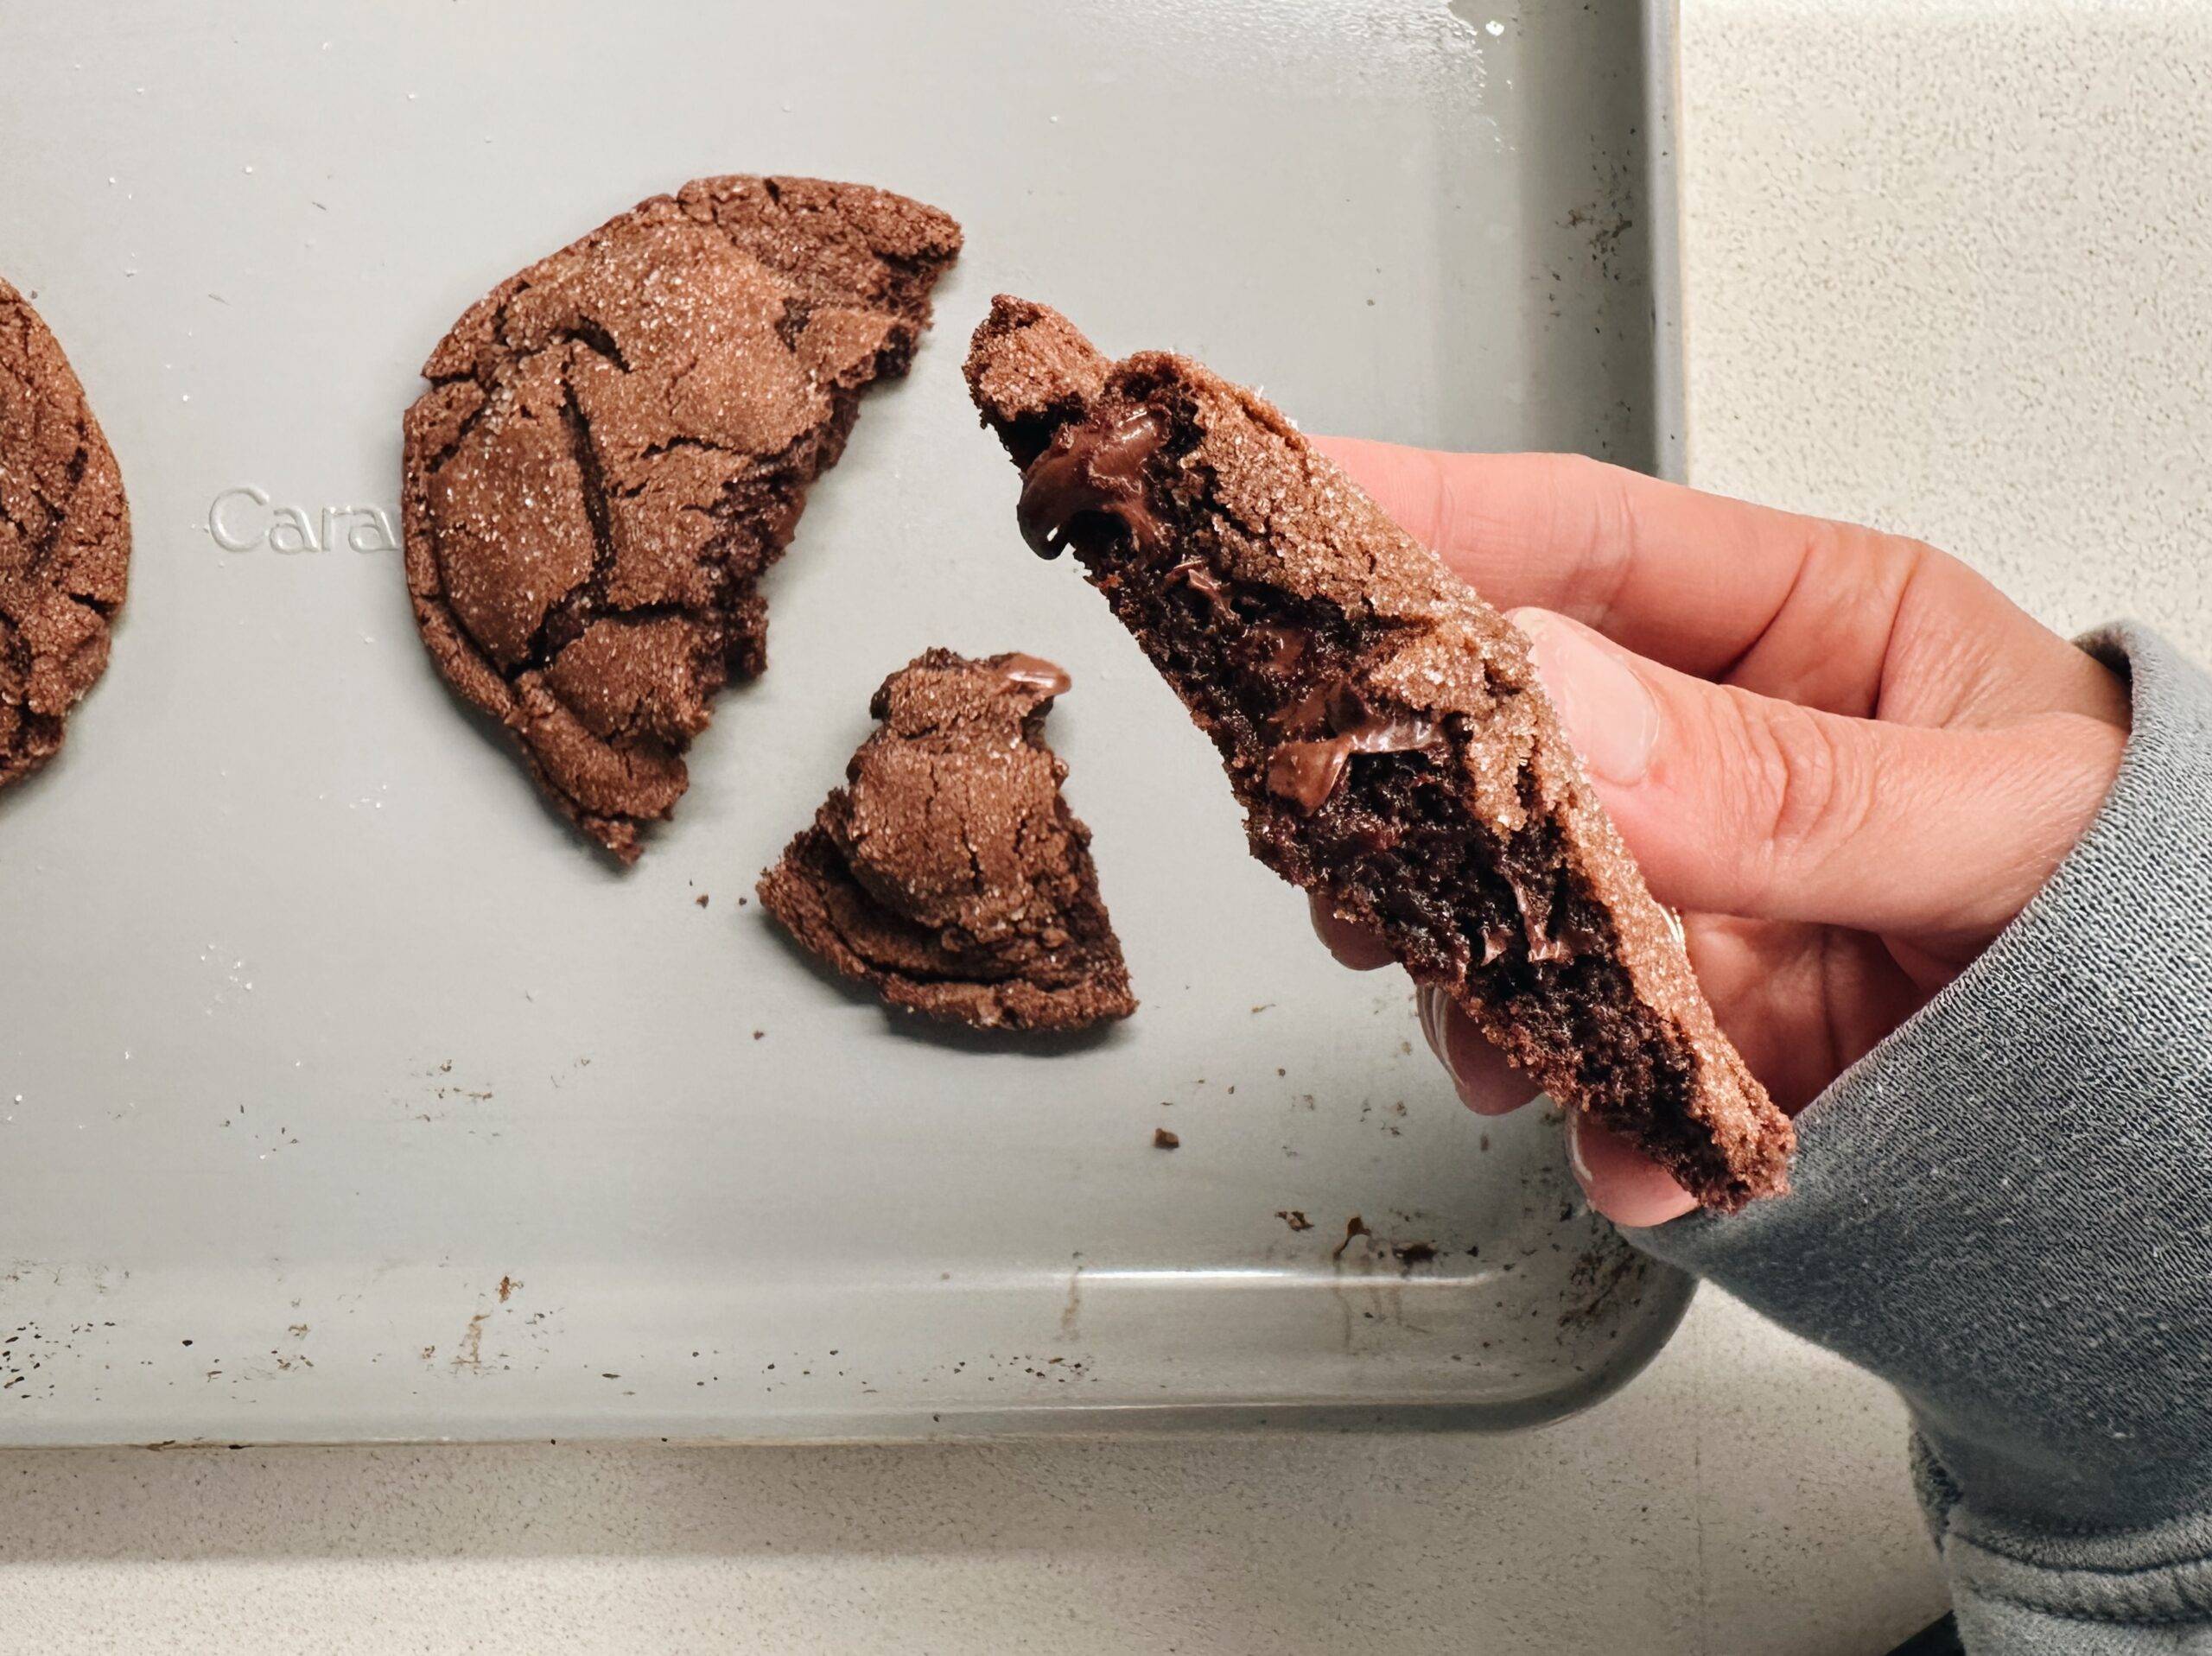 Hand holding a chocolate cookie.